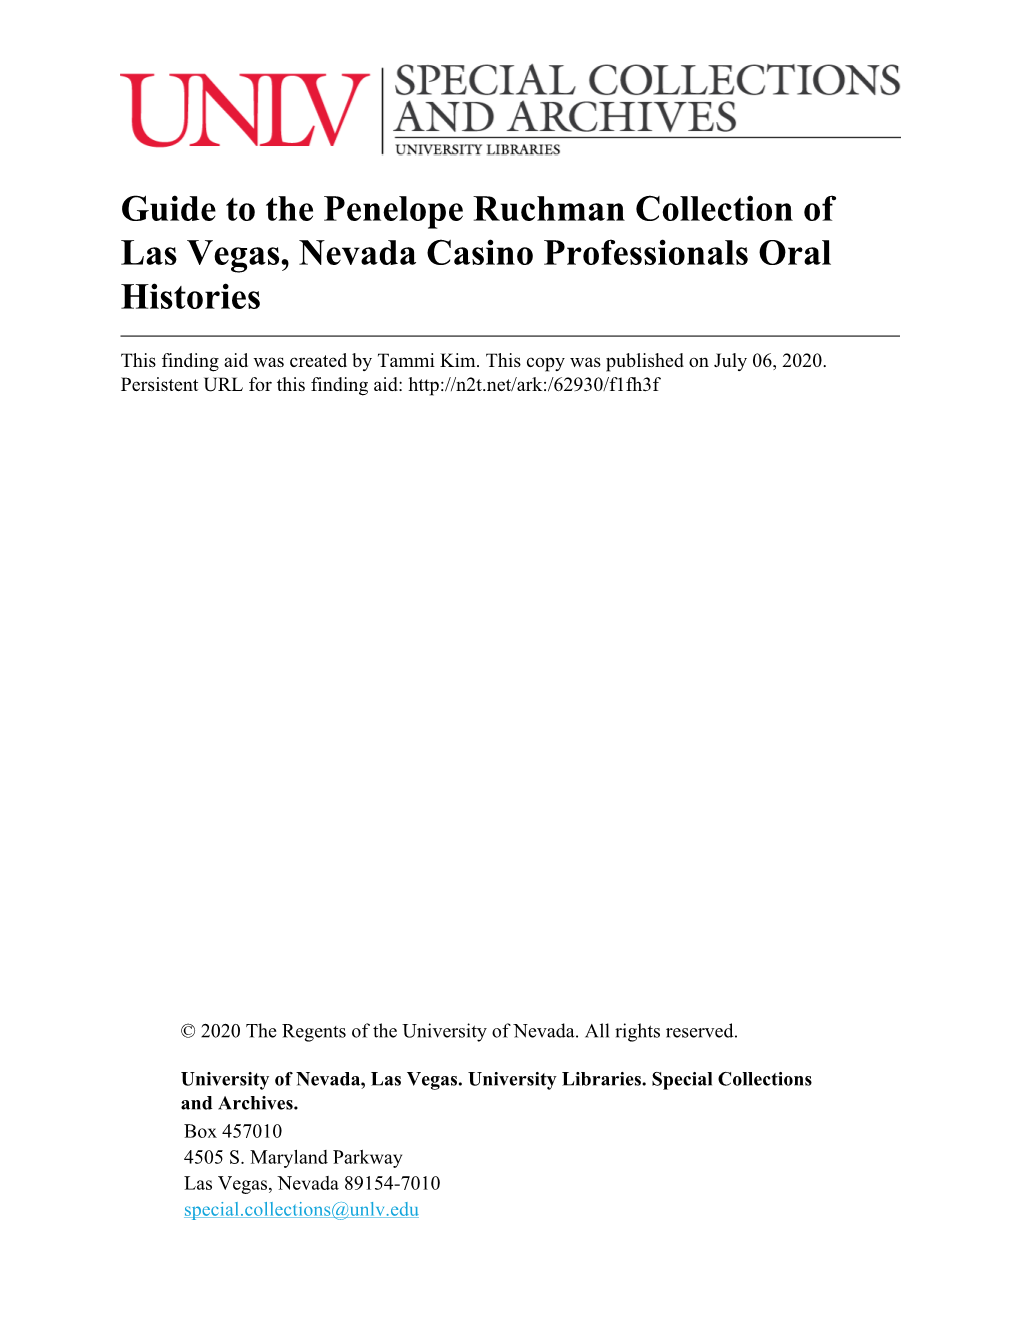 Guide to the Penelope Ruchman Collection of Las Vegas, Nevada Casino Professionals Oral Histories